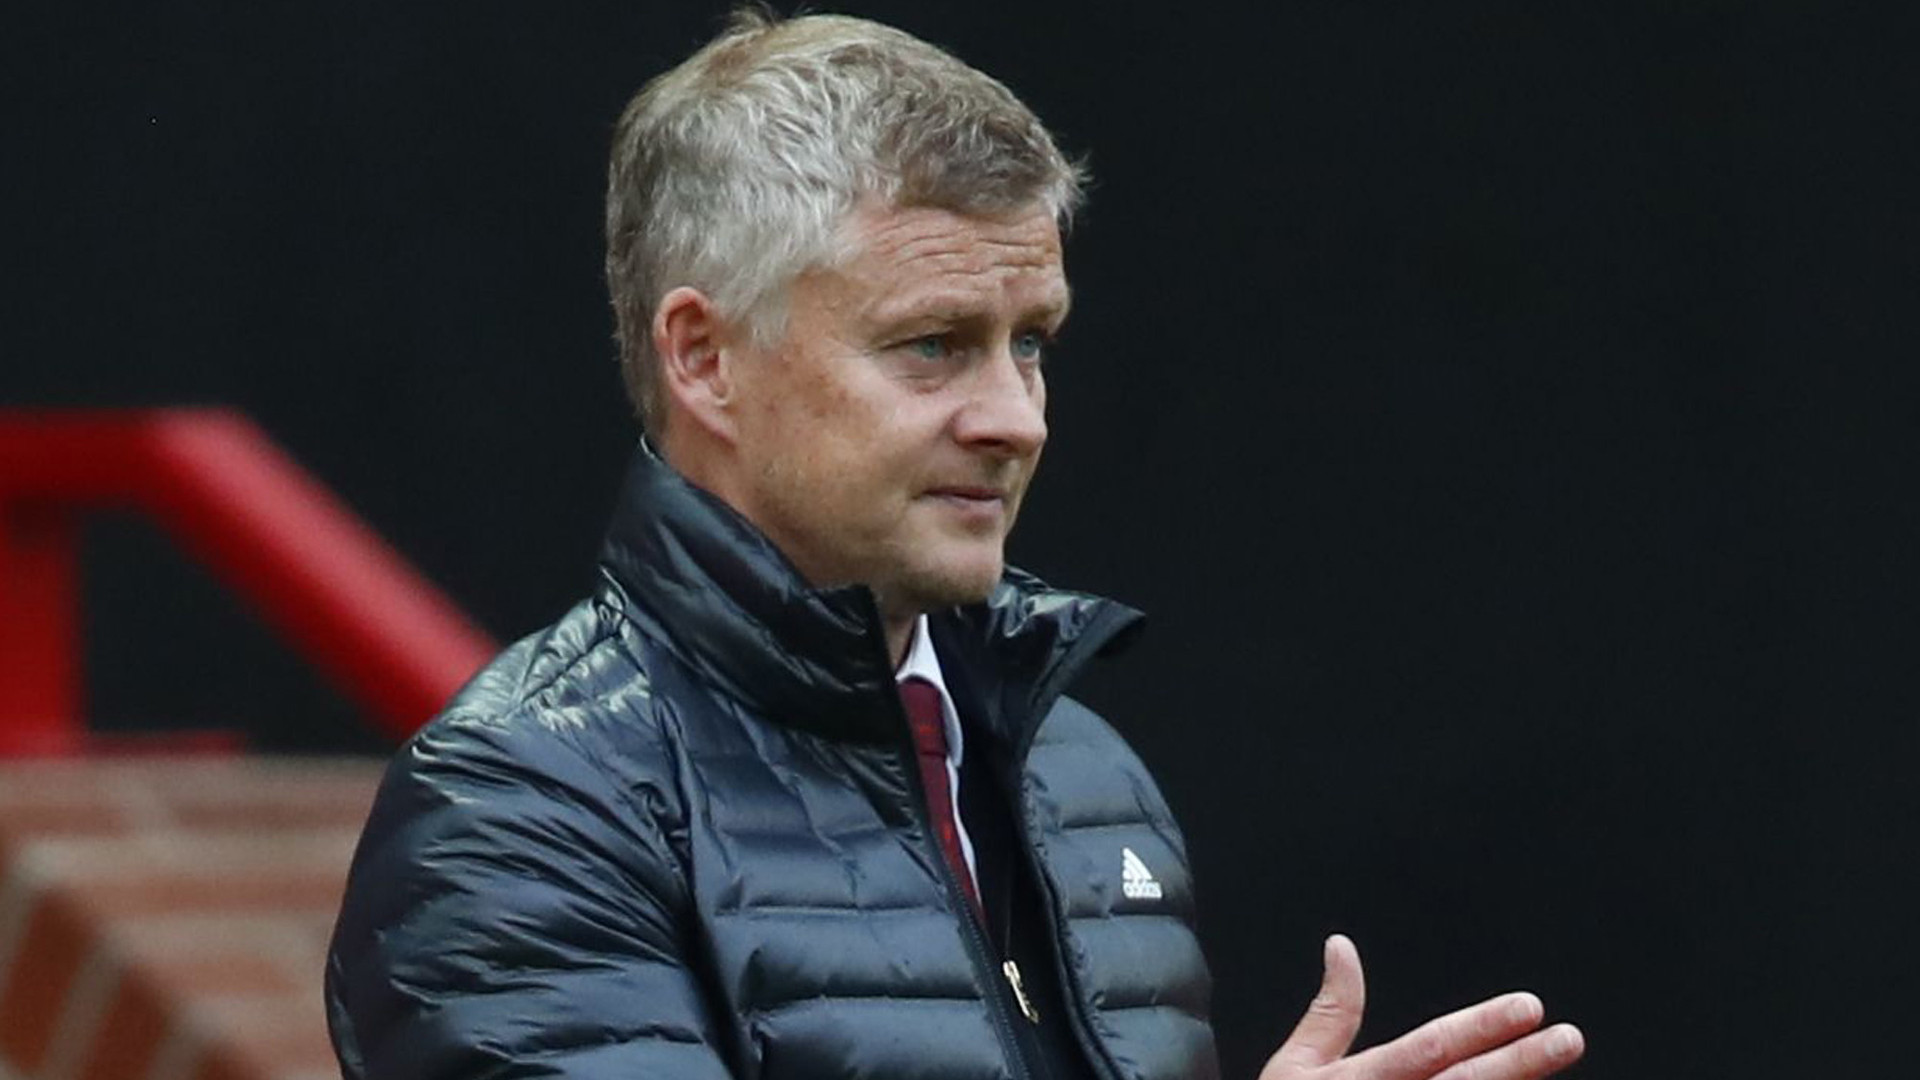 Manchester United will go on the offensive in Thursday's Europa League clash with Granada, Ole Gunnar Solskjaer insists.